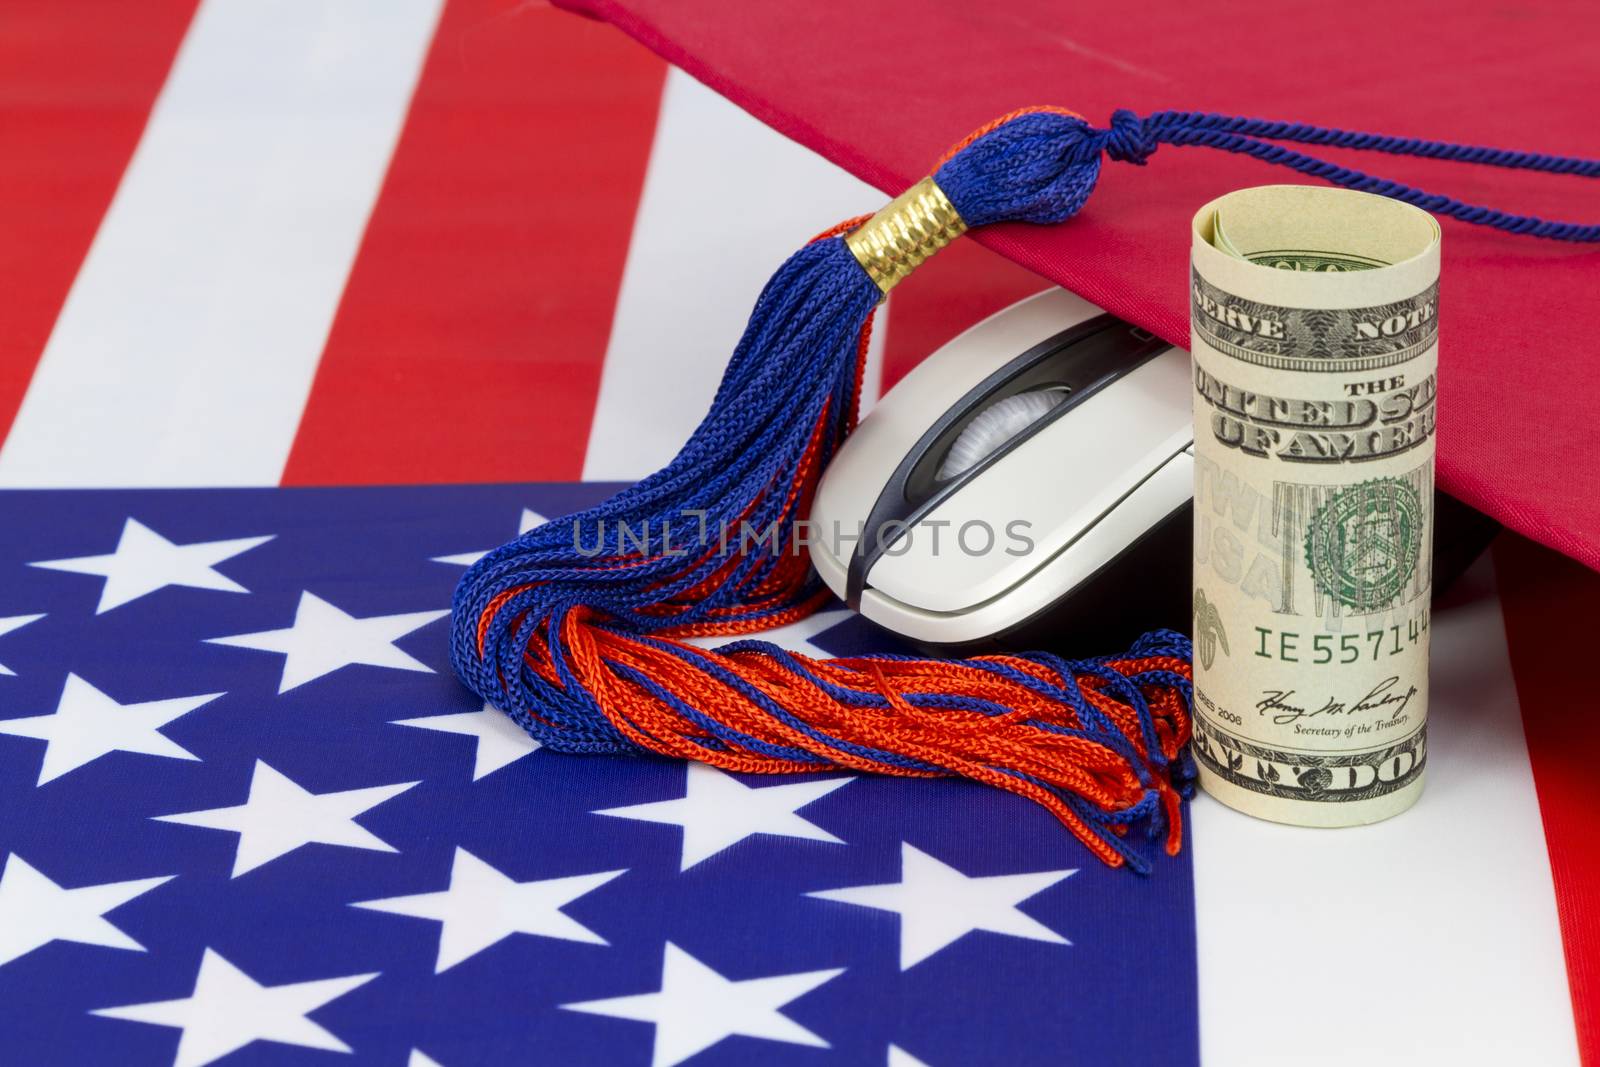 Graduation cap with tassle placed with computer mouse and dollar currency on American flag pattern.  Concept symbolized is the higher salary and job opportunities of degree associated with electronics and digital knowledge.  Computer science degree holds benefits reflected in national education STEM policy.  